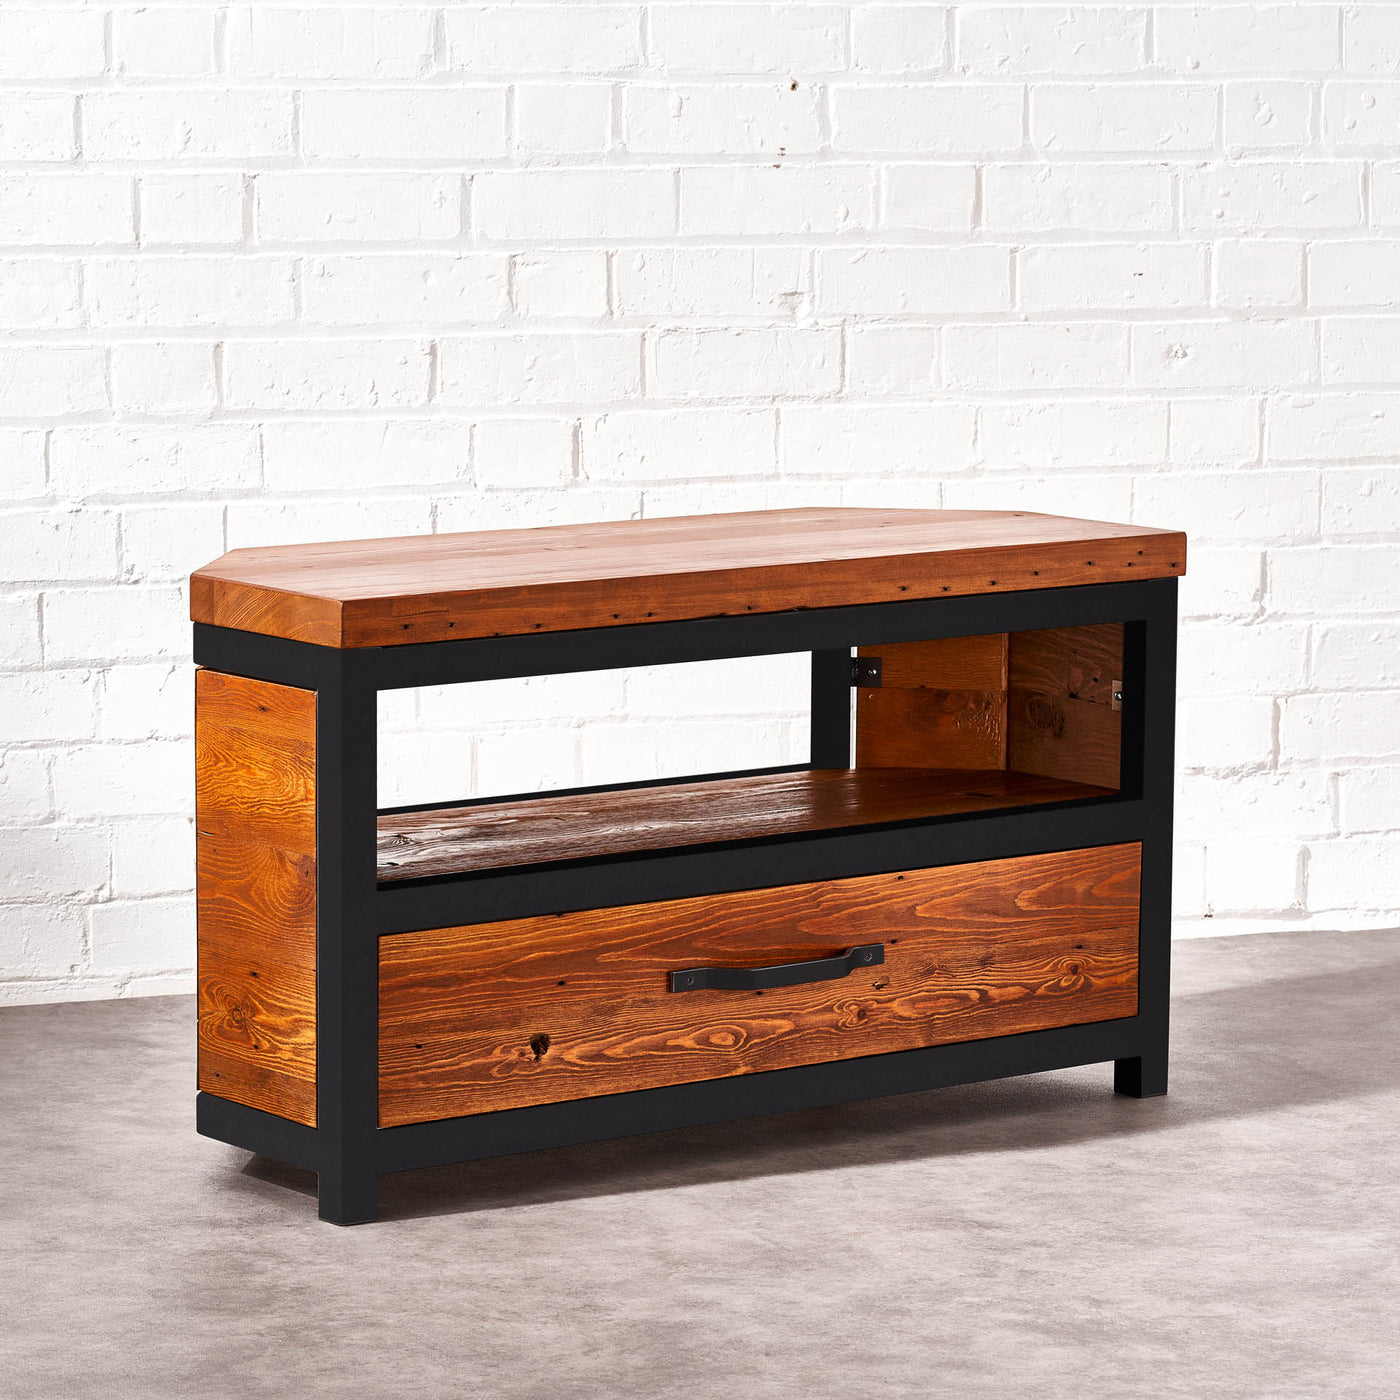 Handcrafted Corner TV Stand from Reclaimed Timber with Storage Drawer